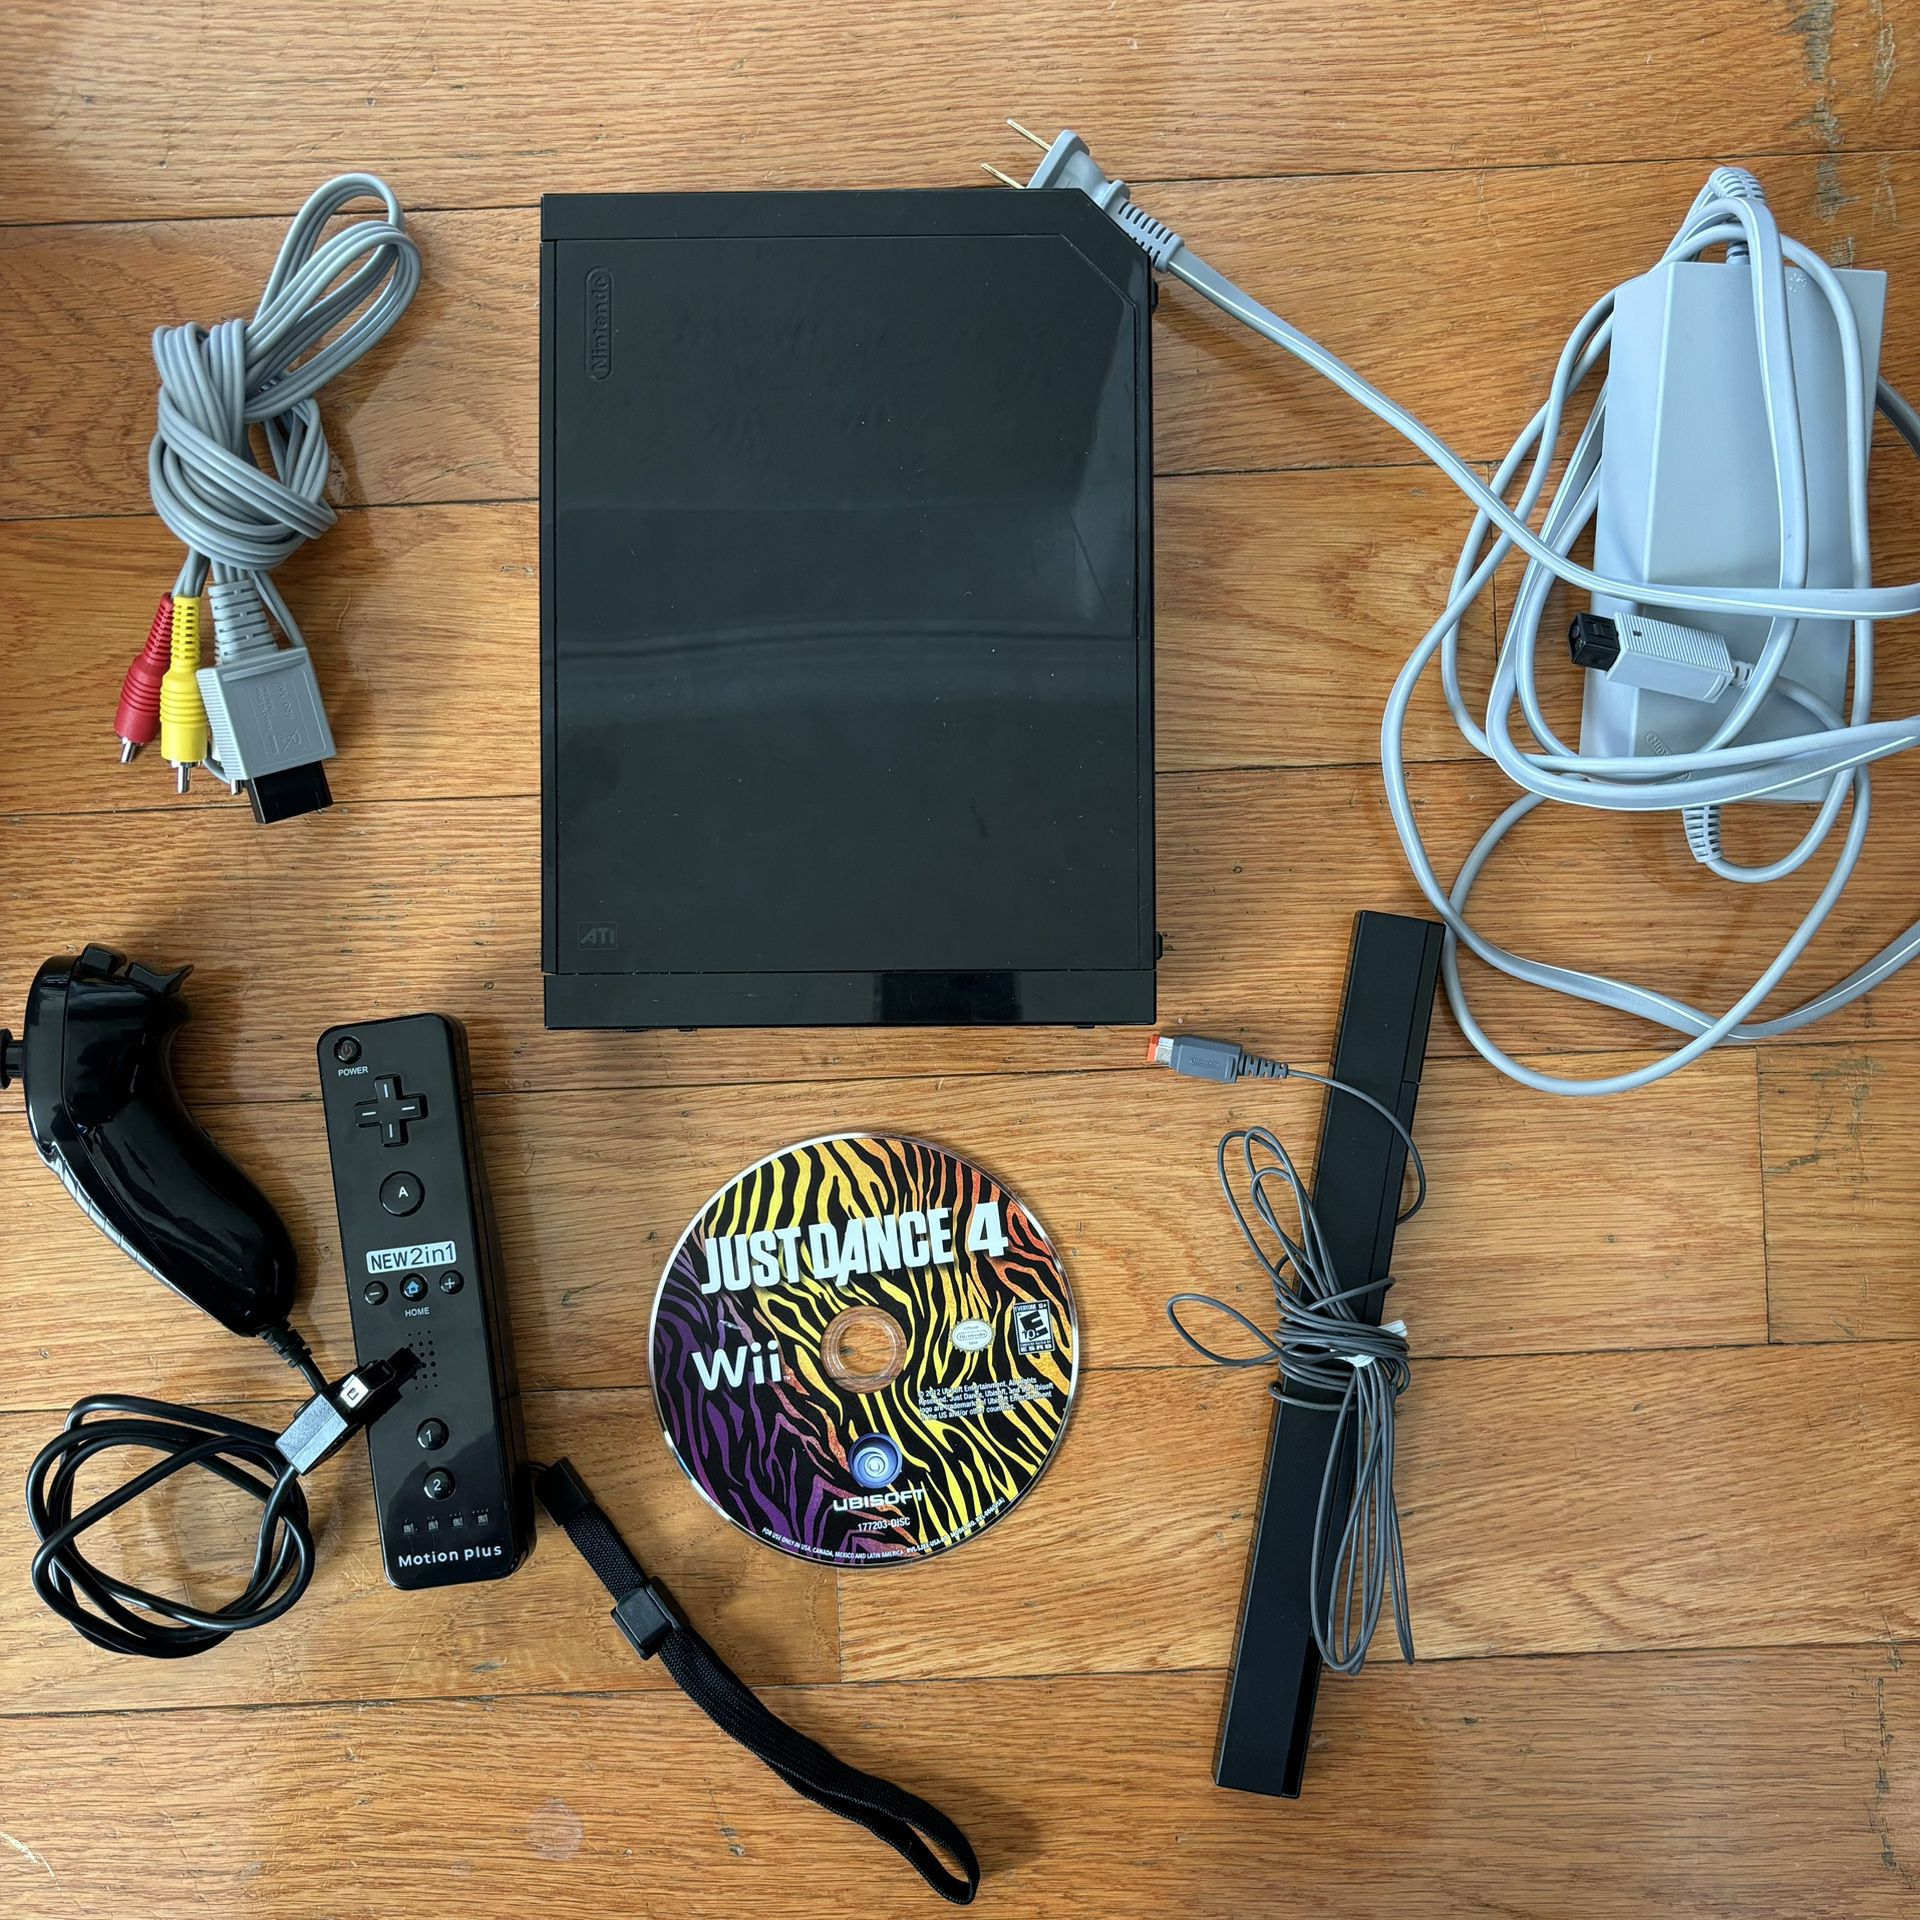 Nintendo Wii Console w/ Wiimote Nunchuck Cables And Just Dance 4